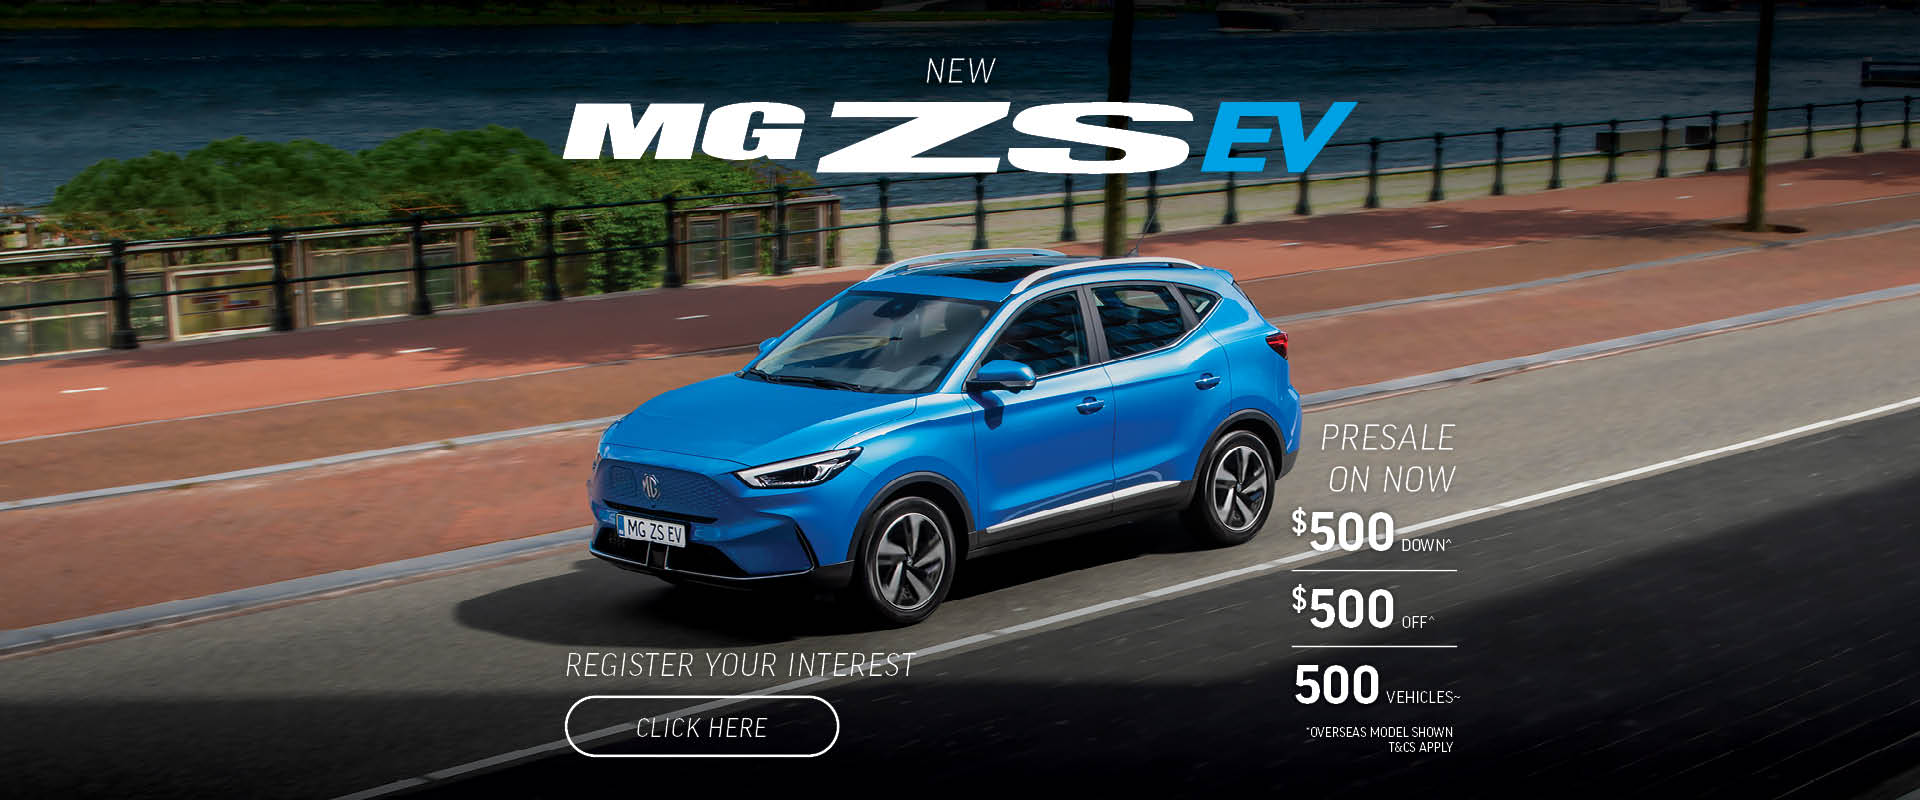 MG ZS EV 2022 - Coming Soon, Register your interest today!